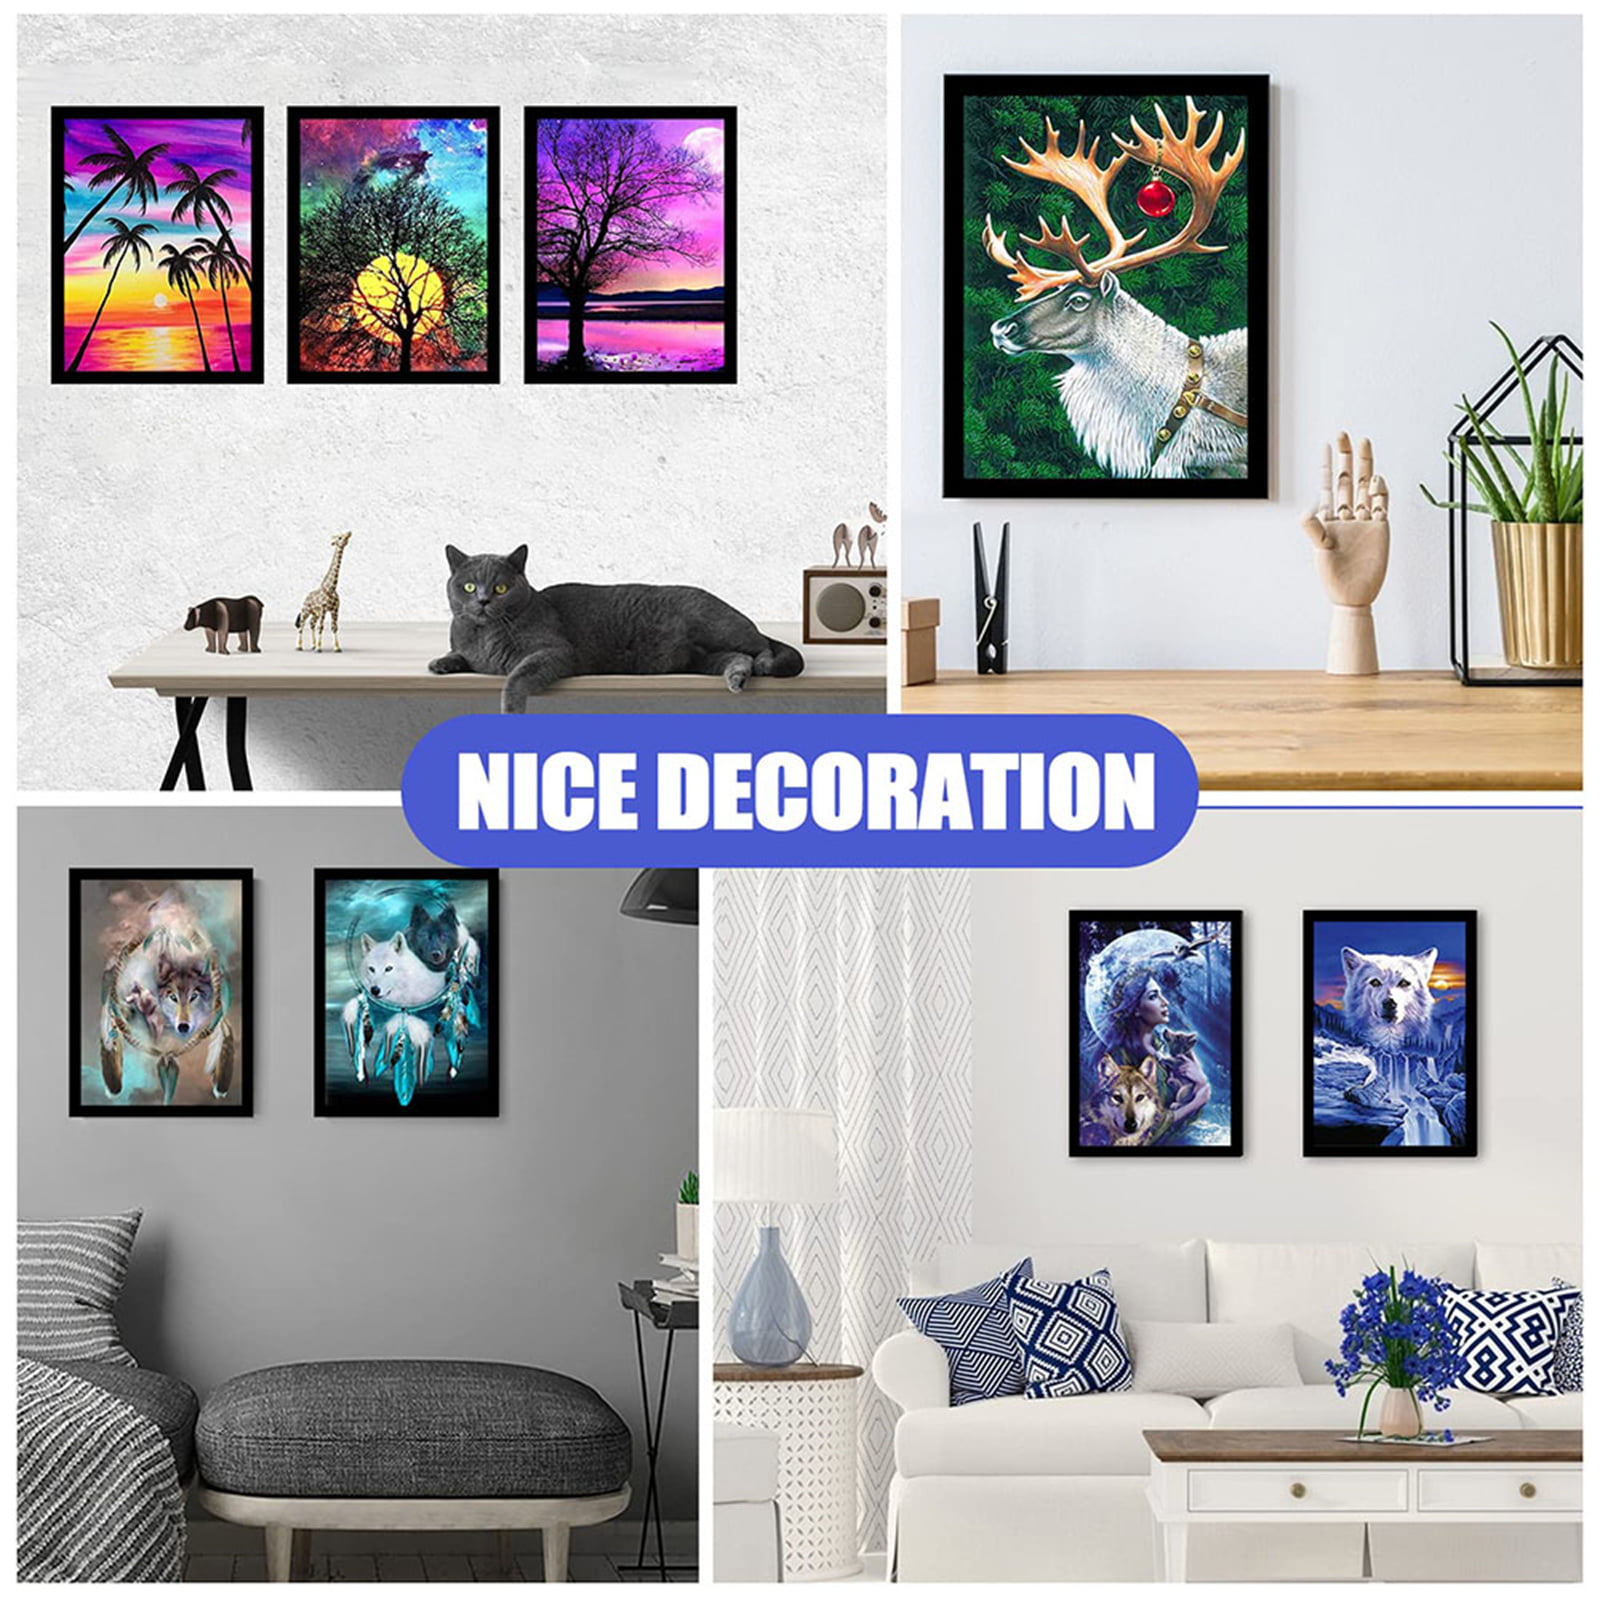  Diamondd Paintingg Display Frames, 30 X 30 Frame, Magnetic Art  Frames, Display Painting Pictures, Solid Wood Black Frame, Acrylic  Protective Glass, For Diamond Pictures, Certificates, Photos, Art